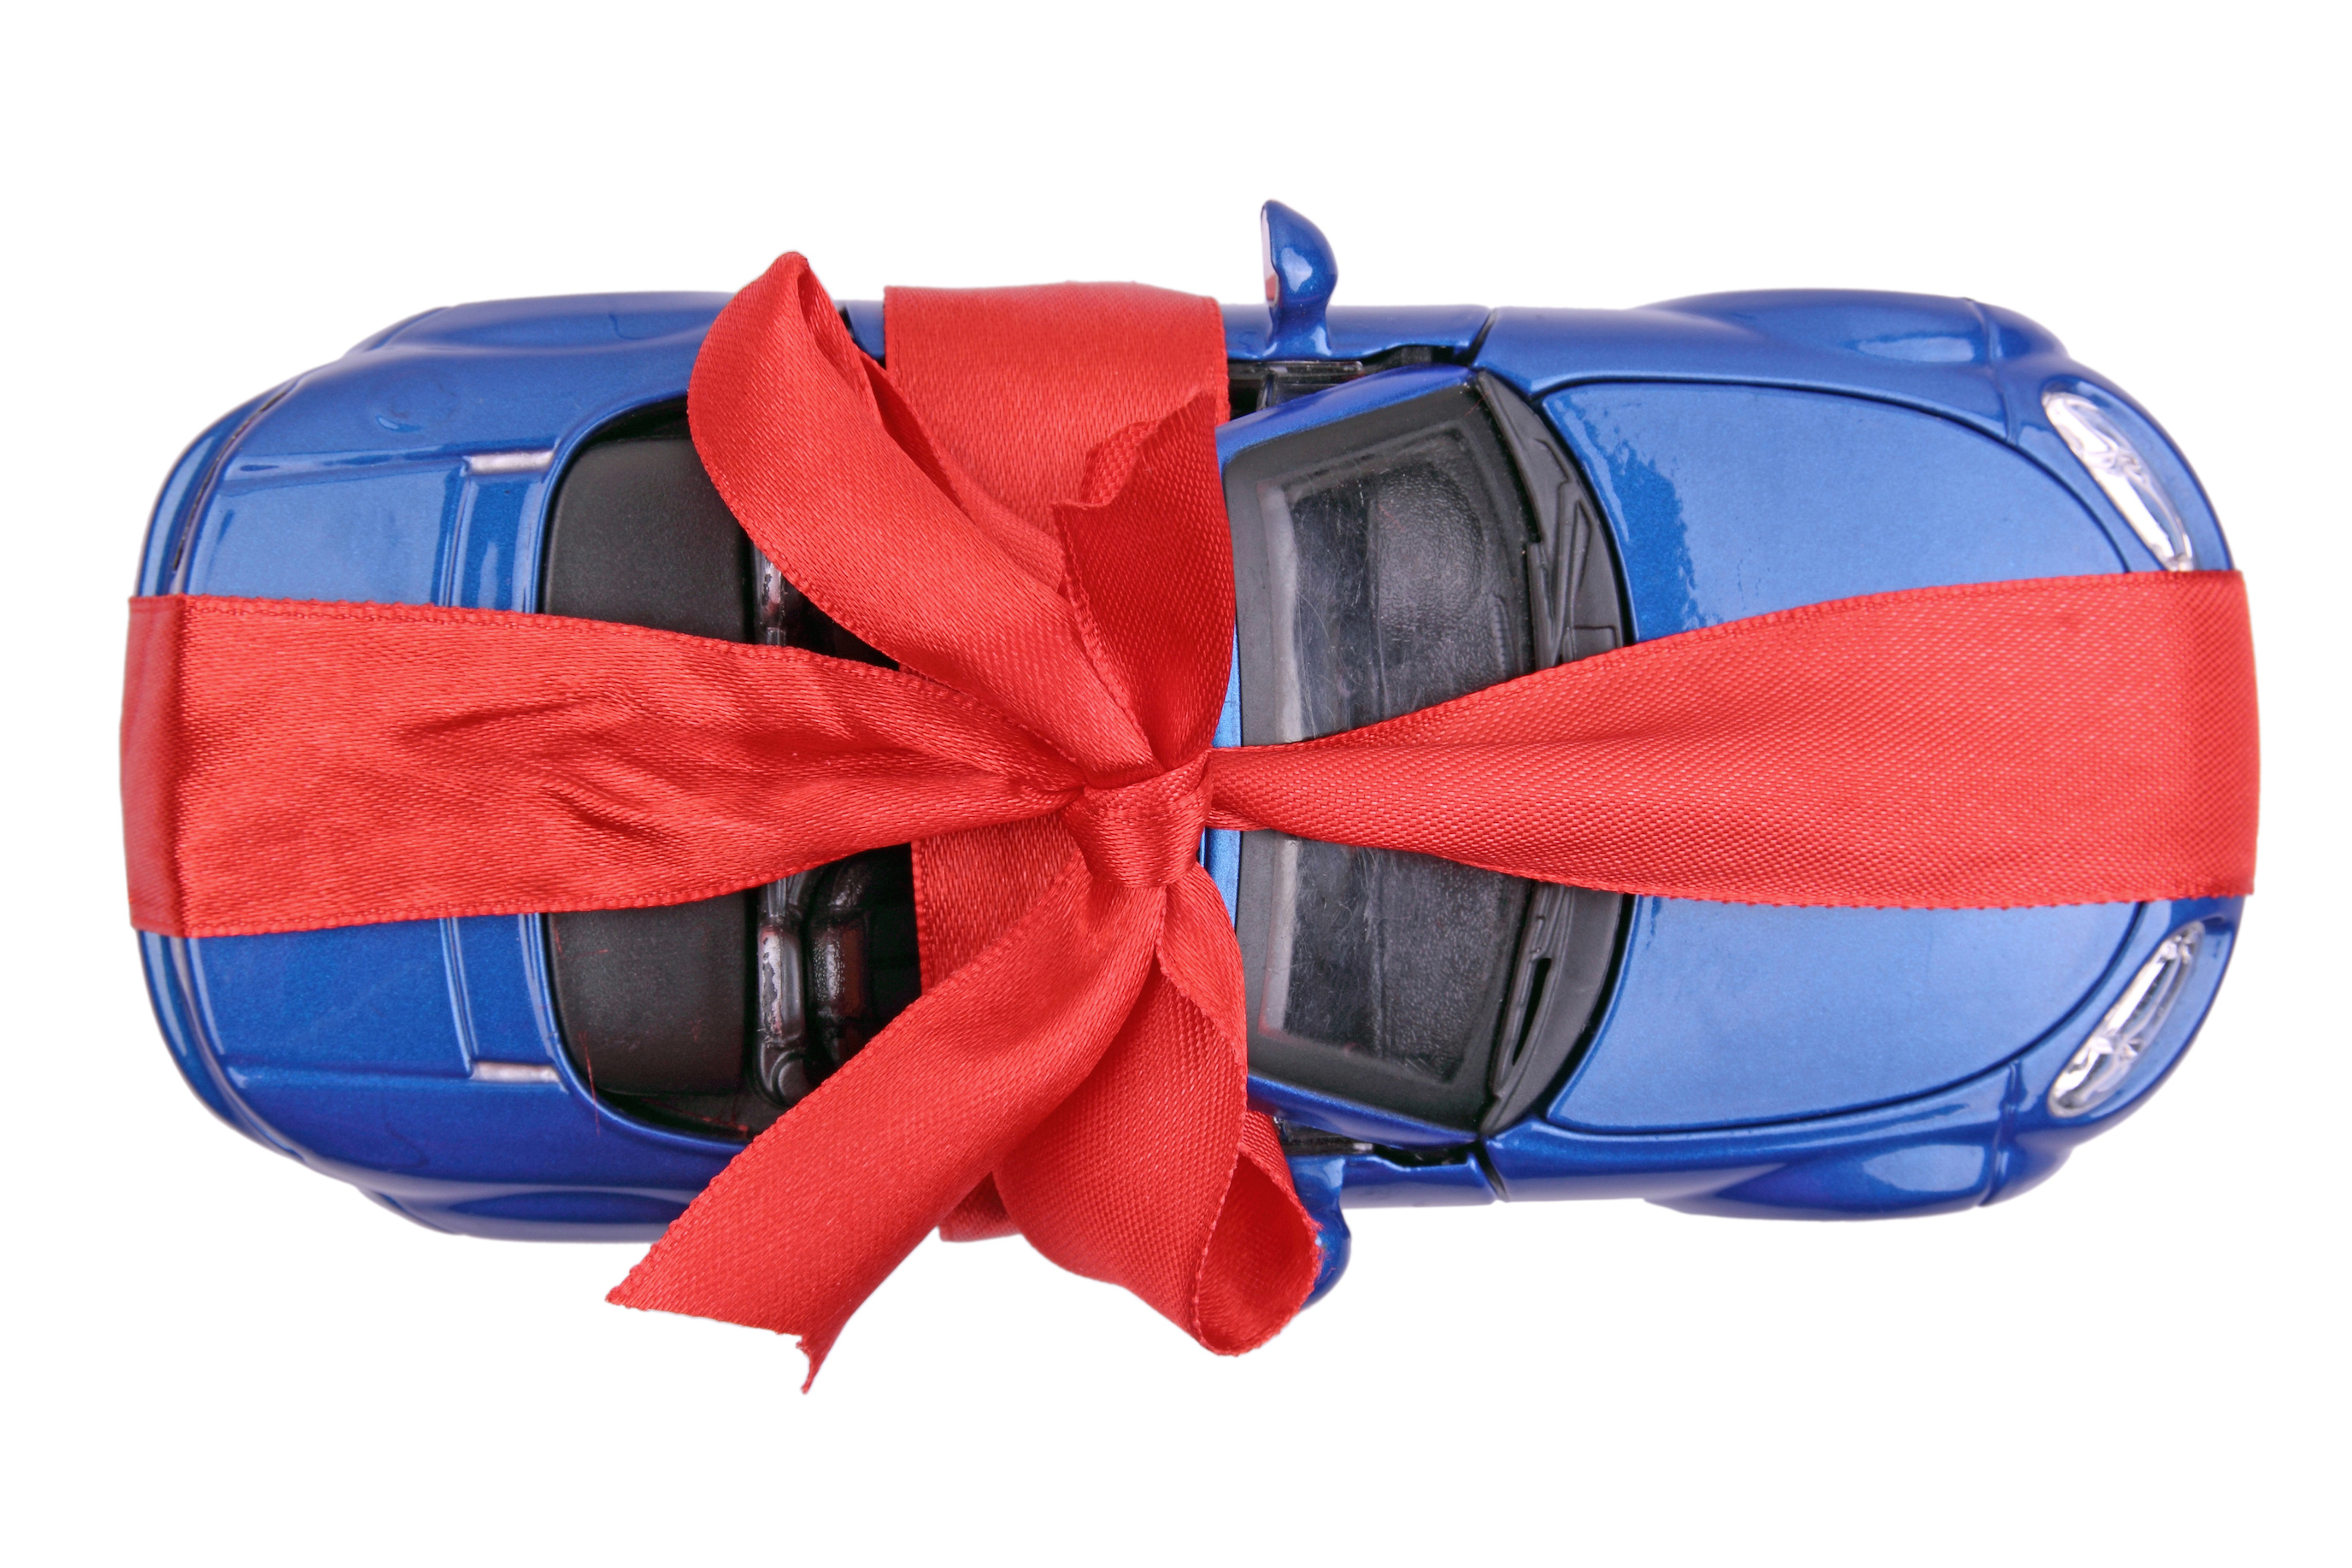 Do People Really Buy Cars as Holiday Gifts?